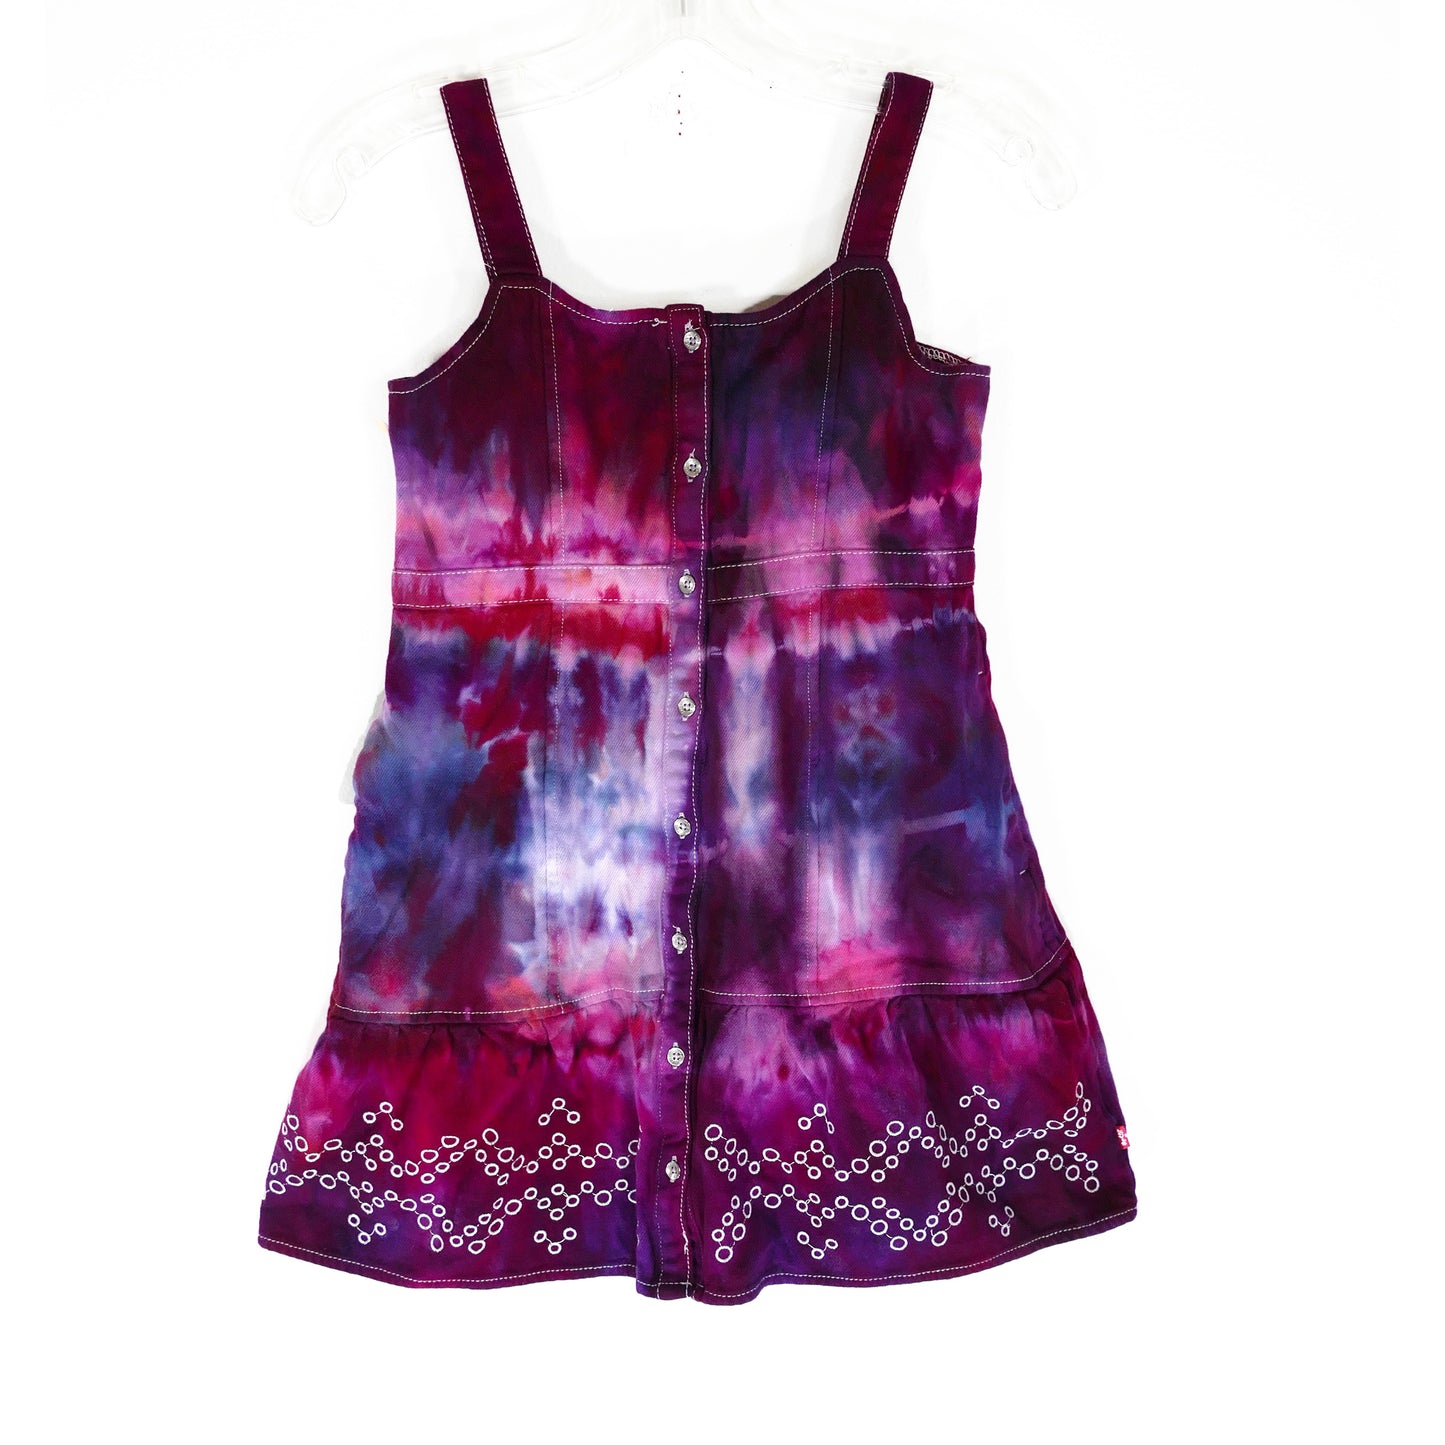 TIE-DYED Levi's dress 10 yrs = Youth size